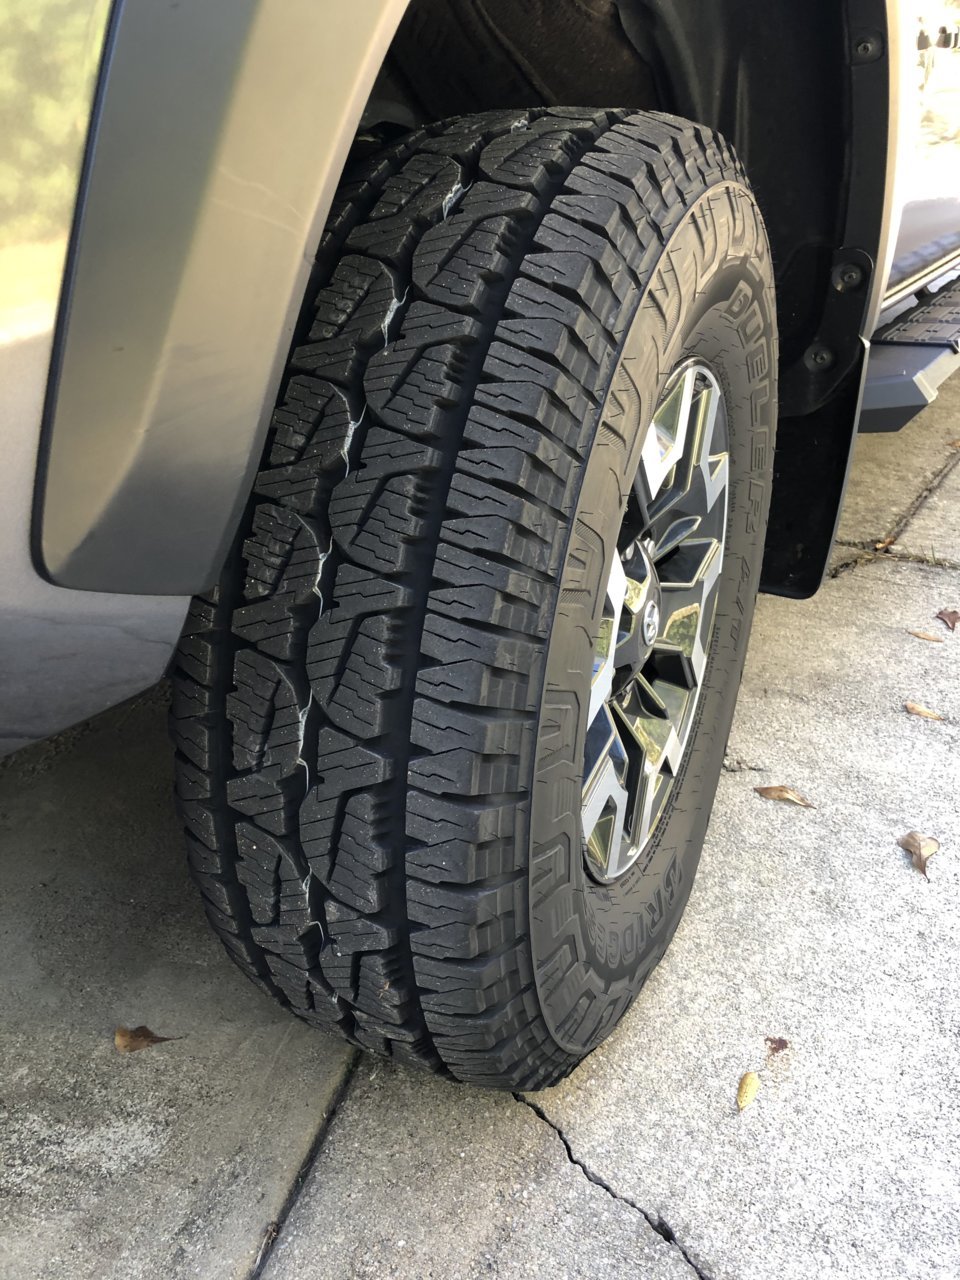 Considering moving fr: Nitto Ridge Grapplers to Goodyear Ultraterrain  265/75/16 | Tacoma World